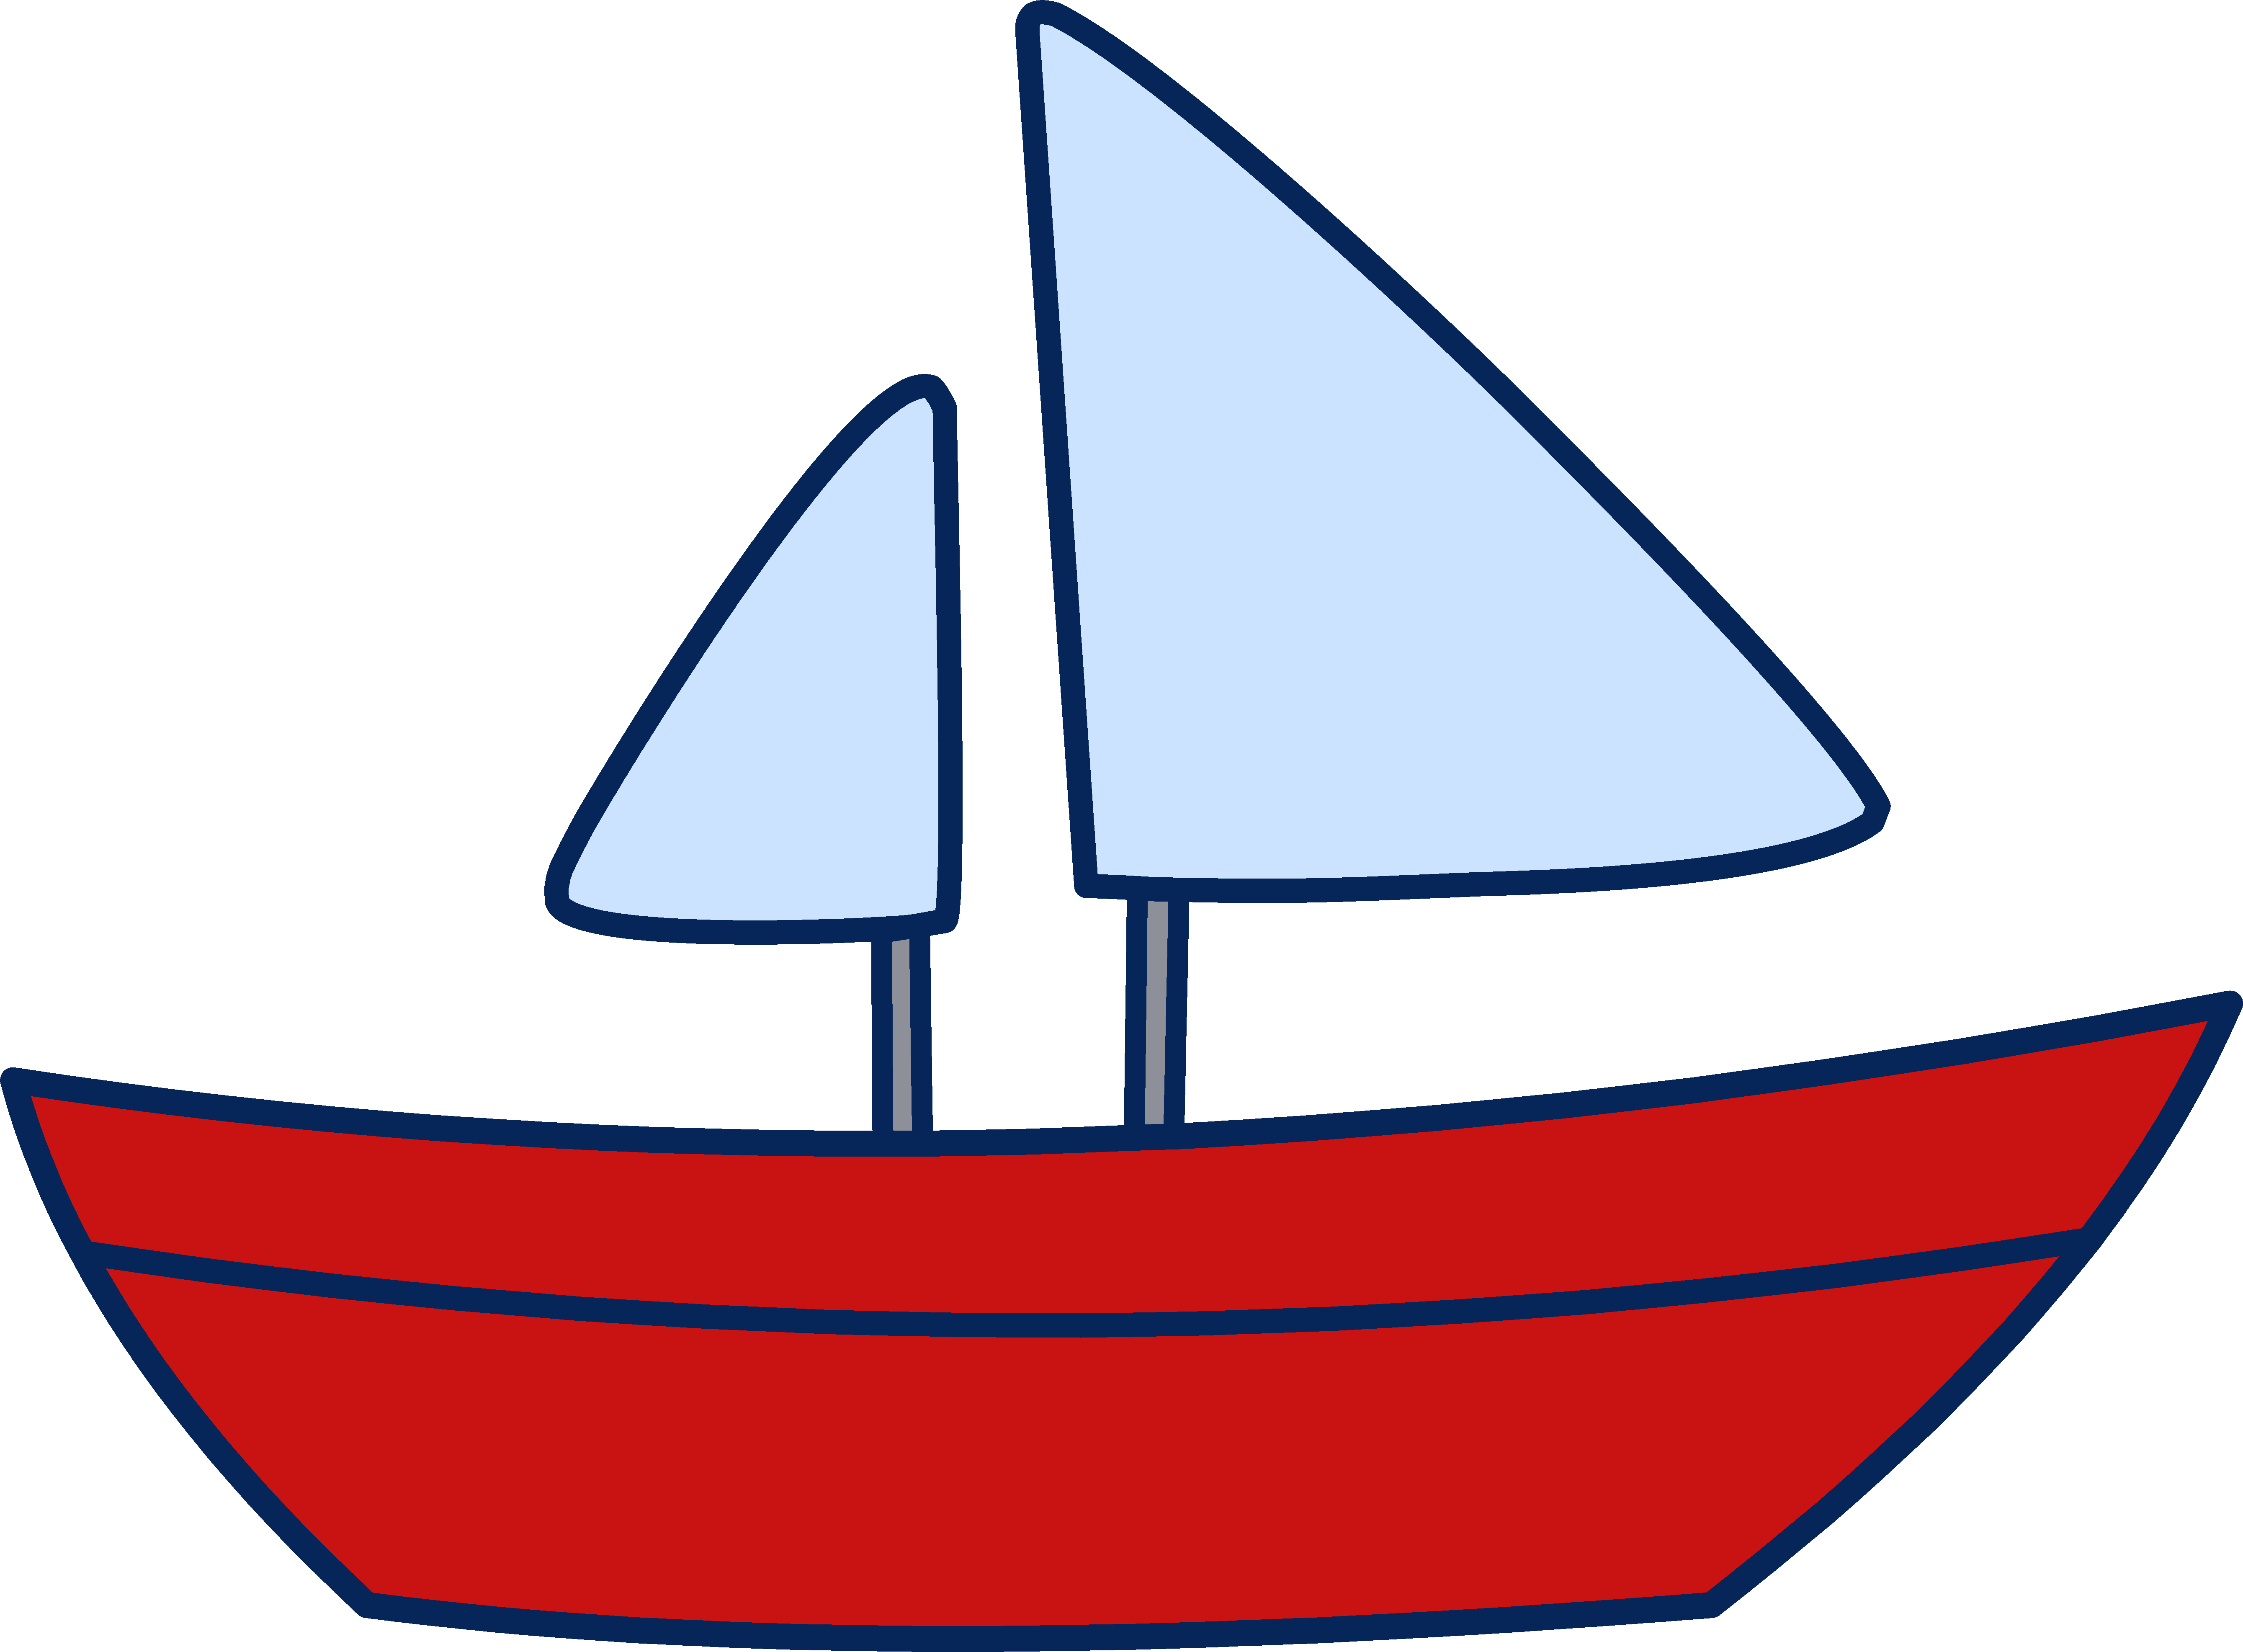 Clipart boat image clipart im